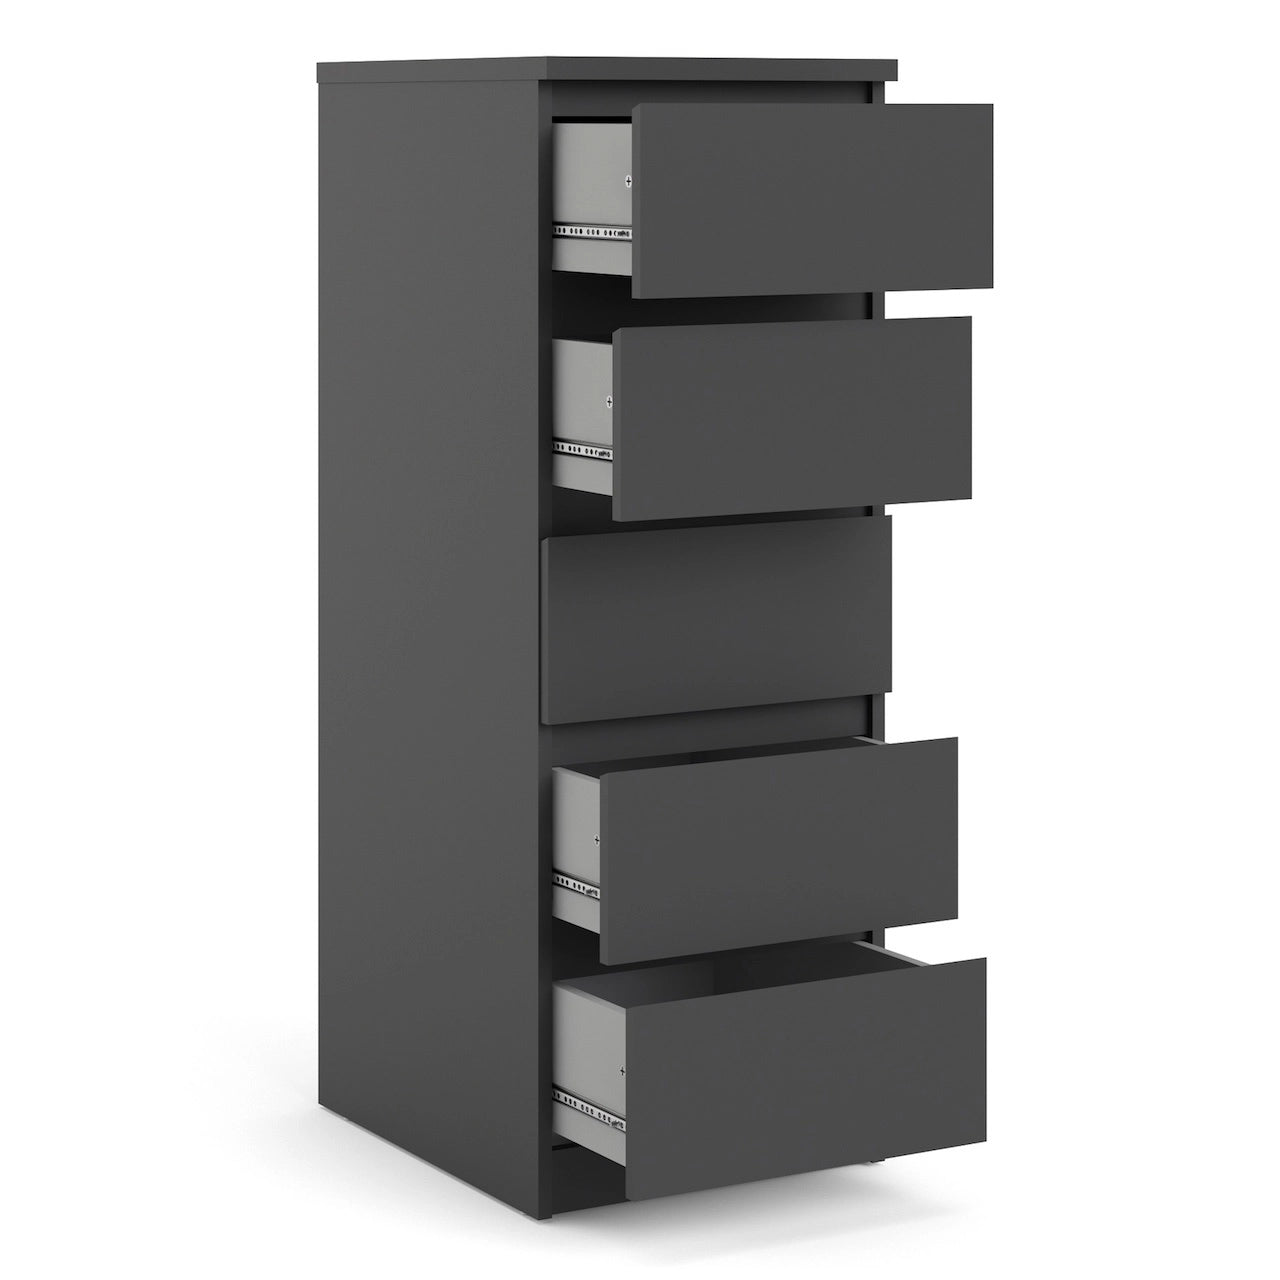 Furniture To Go Naia Narrow Chest of 5 Drawers in Black Matt